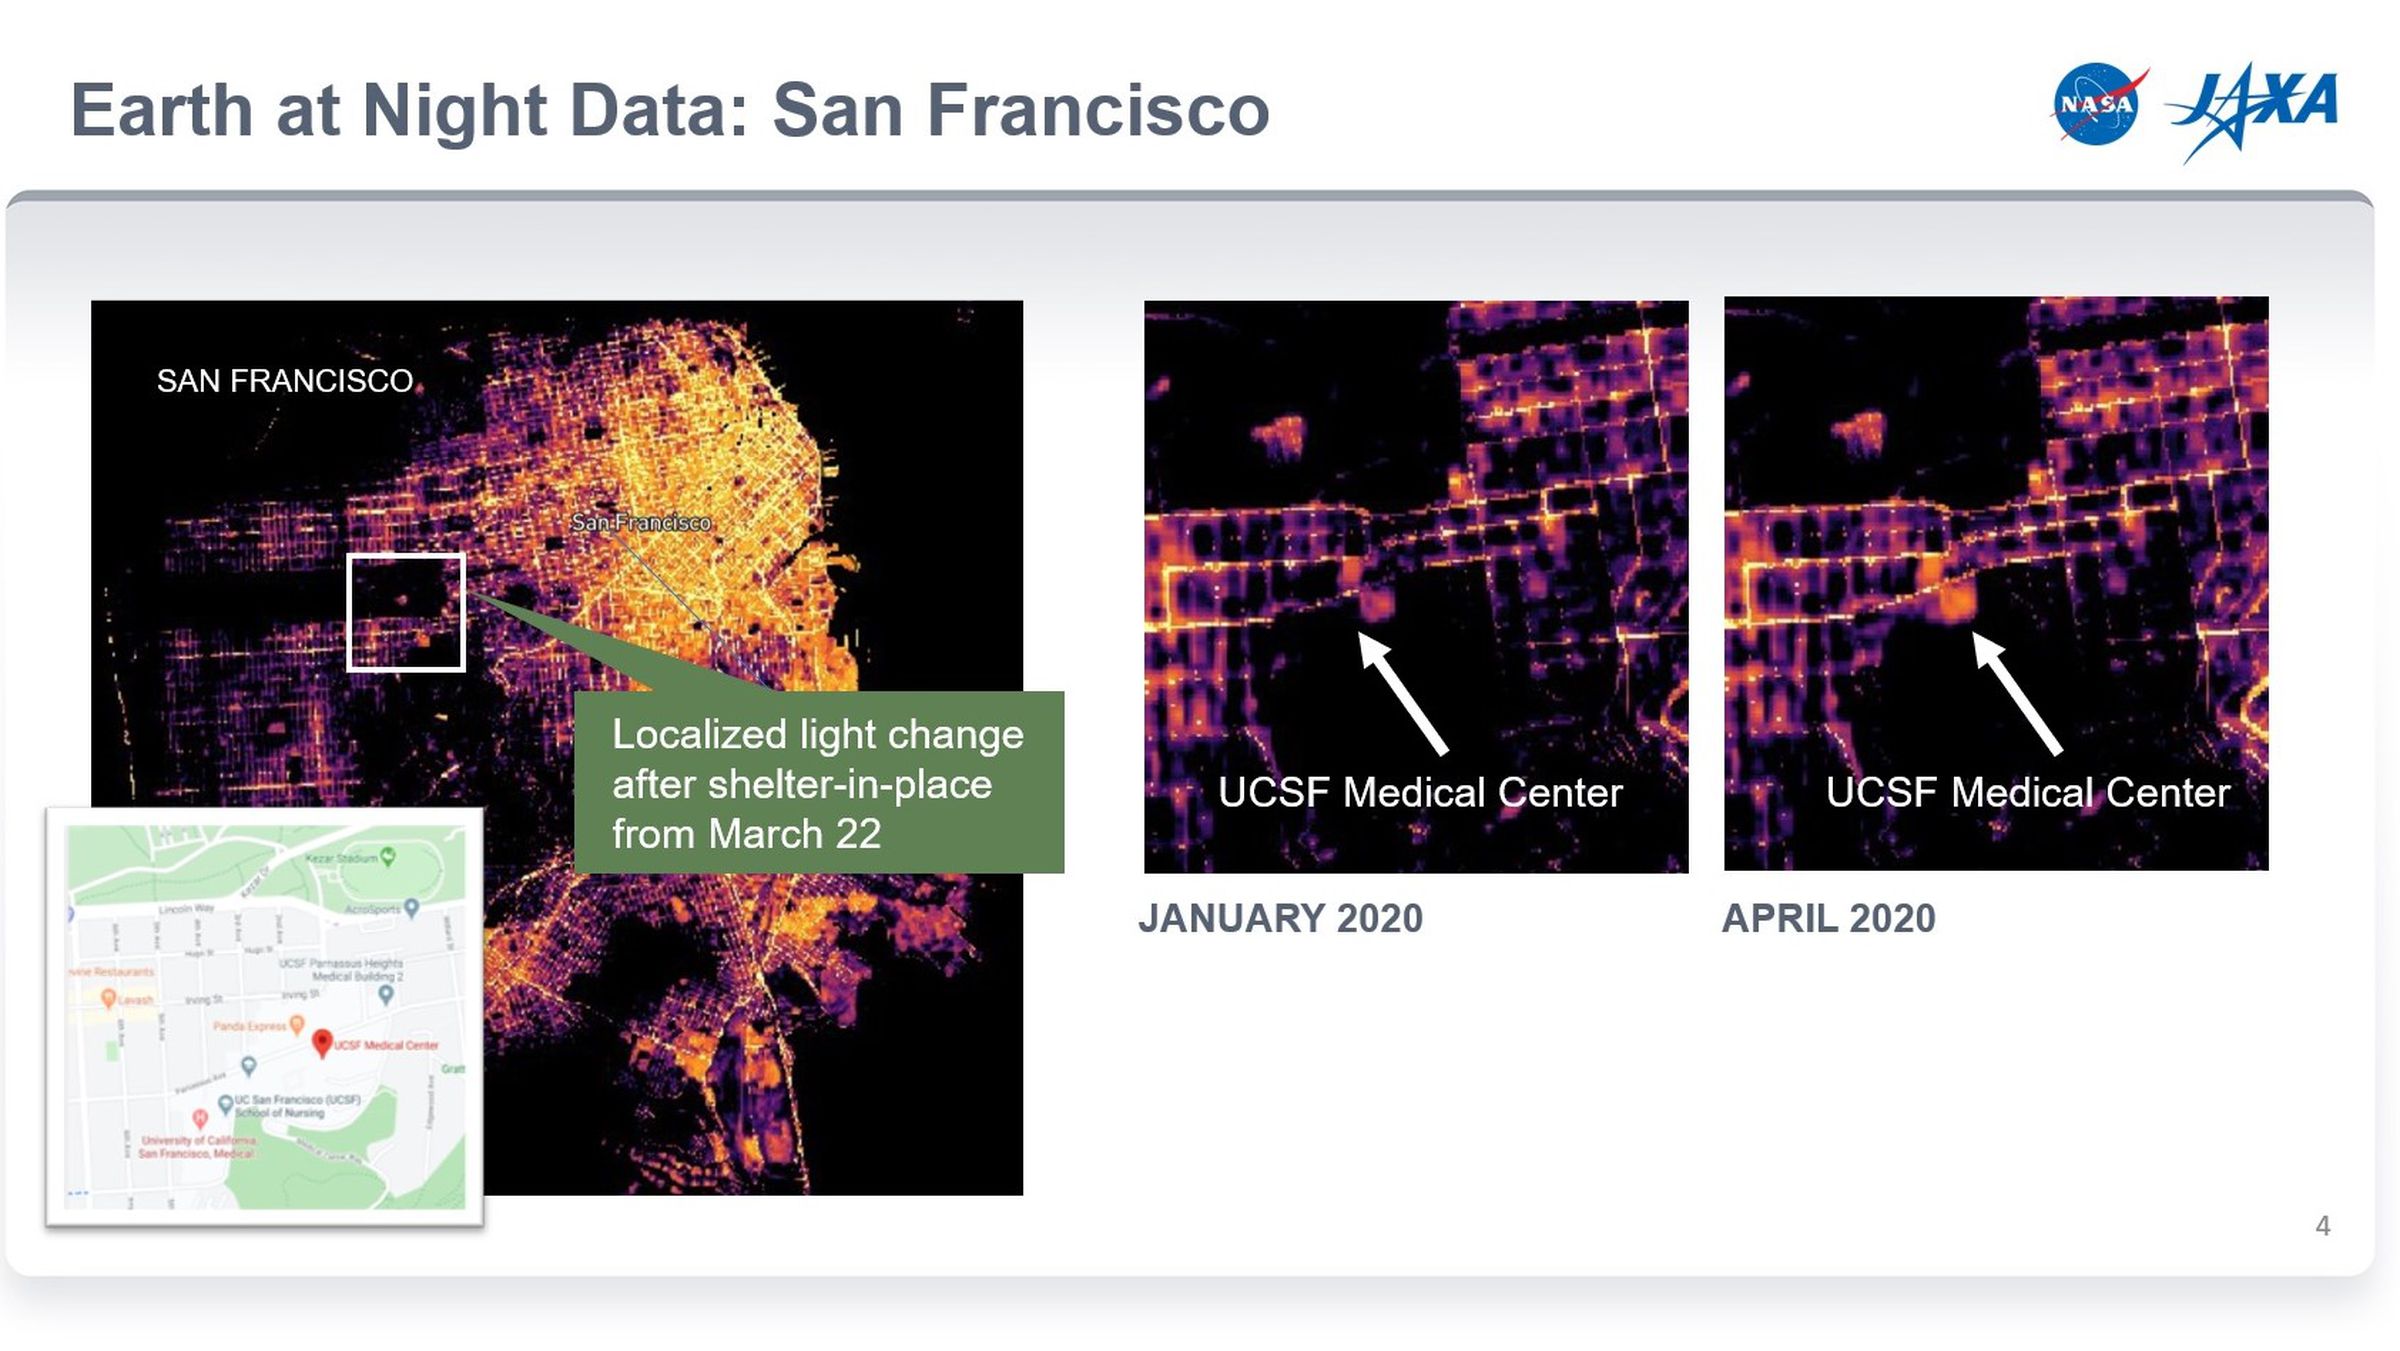 When San Francisco began to shelter in place in mid-March, city night lights detected from space did not change drastically. However, the University of California, San Francisco Medical Center brightened from January to April.